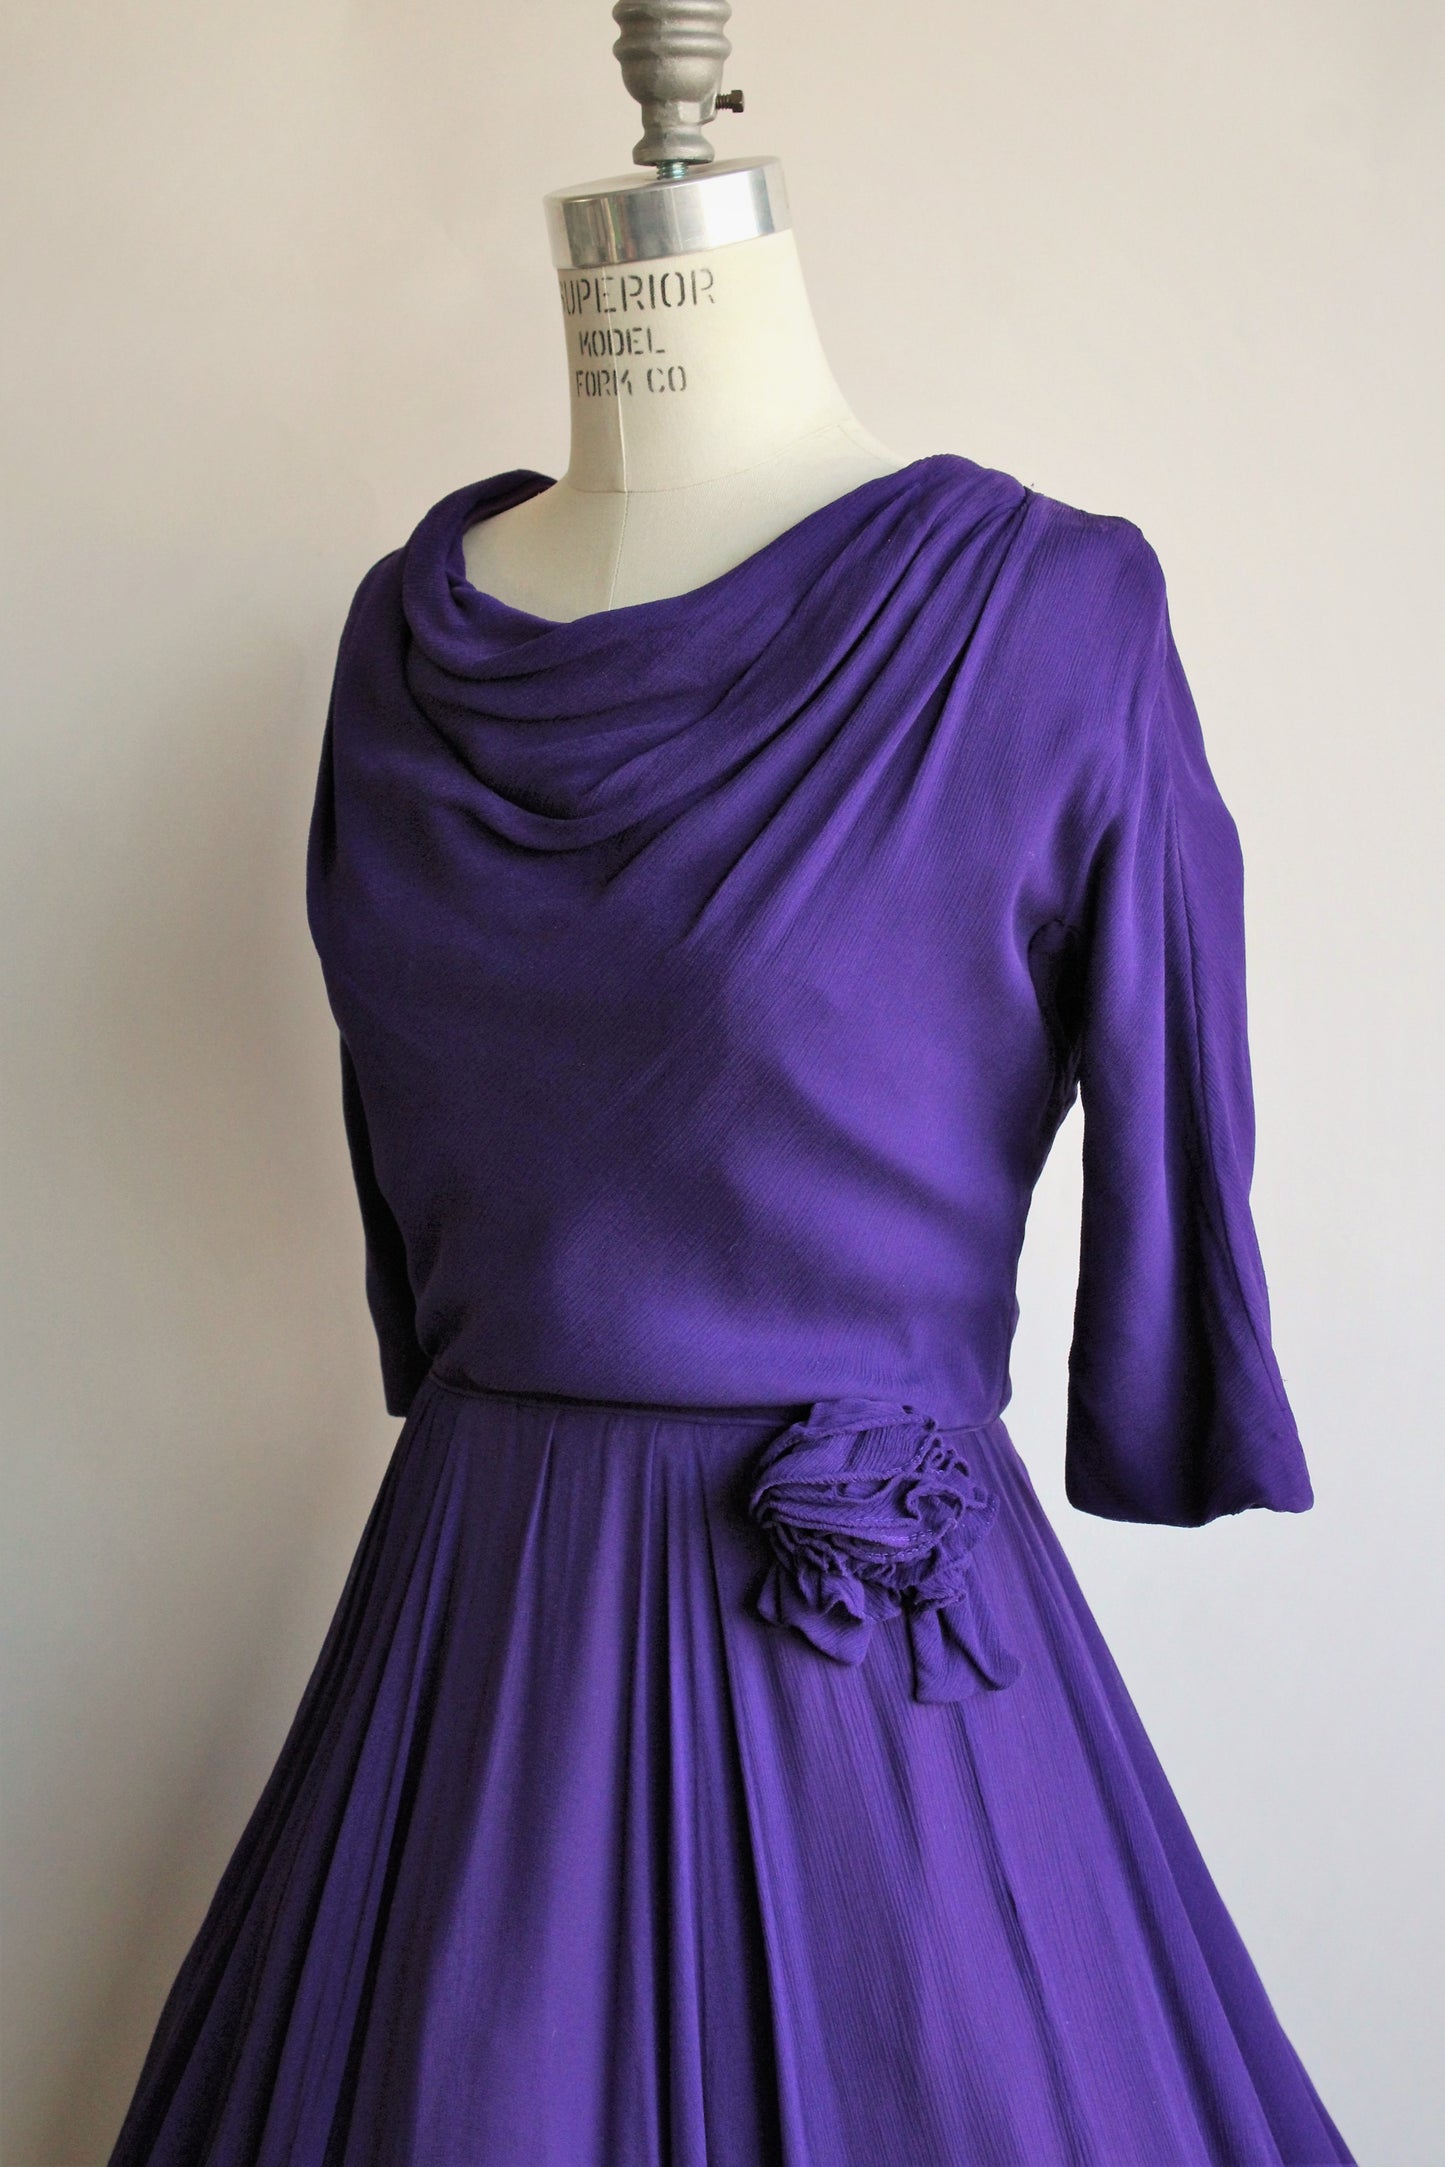 Vintage 1960s Purple Chiffon Fit And Flare Party Dress by Miss Elliette